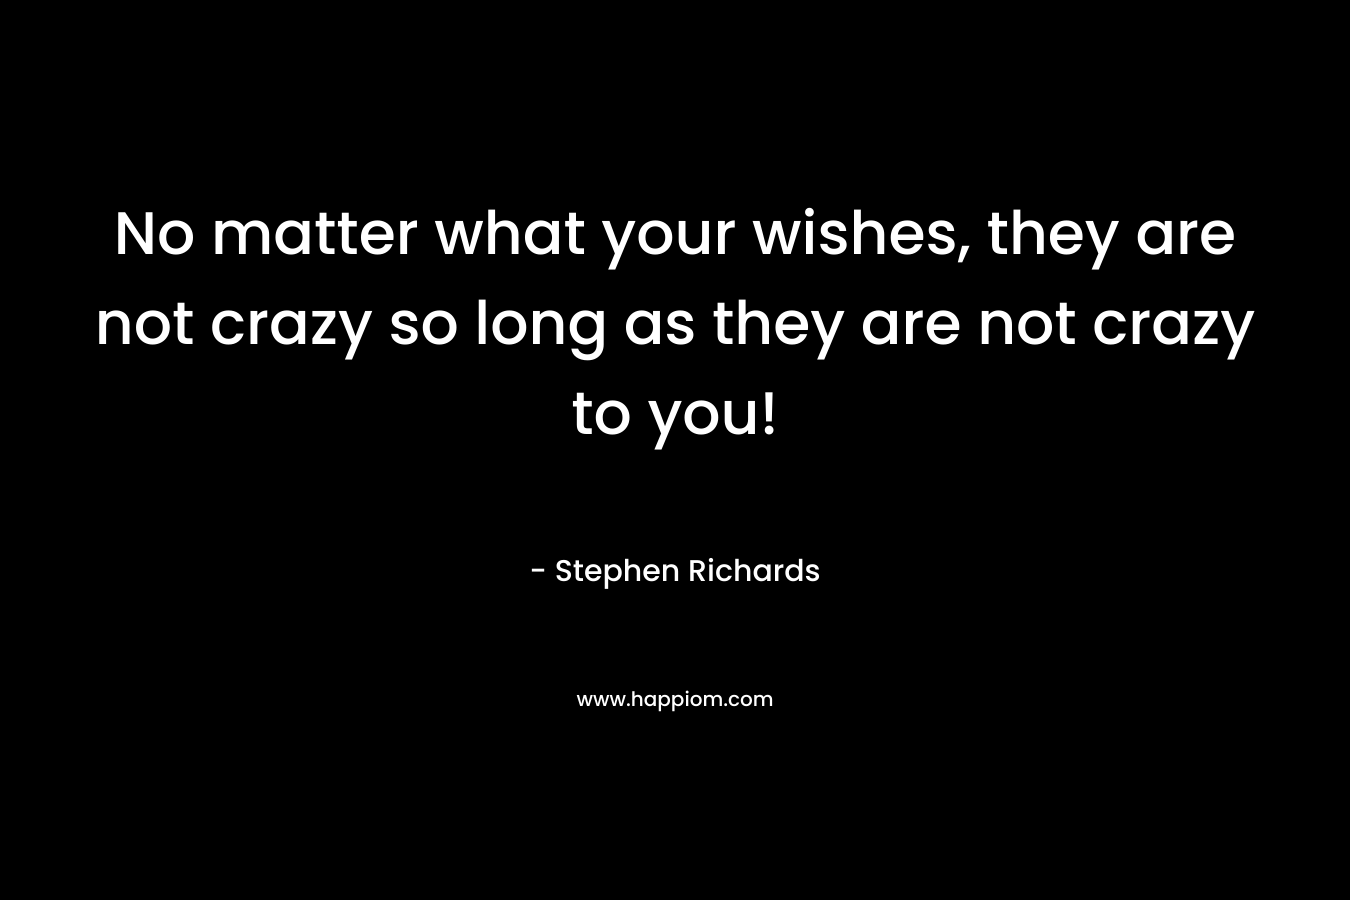 No matter what your wishes, they are not crazy so long as they are not crazy to you!